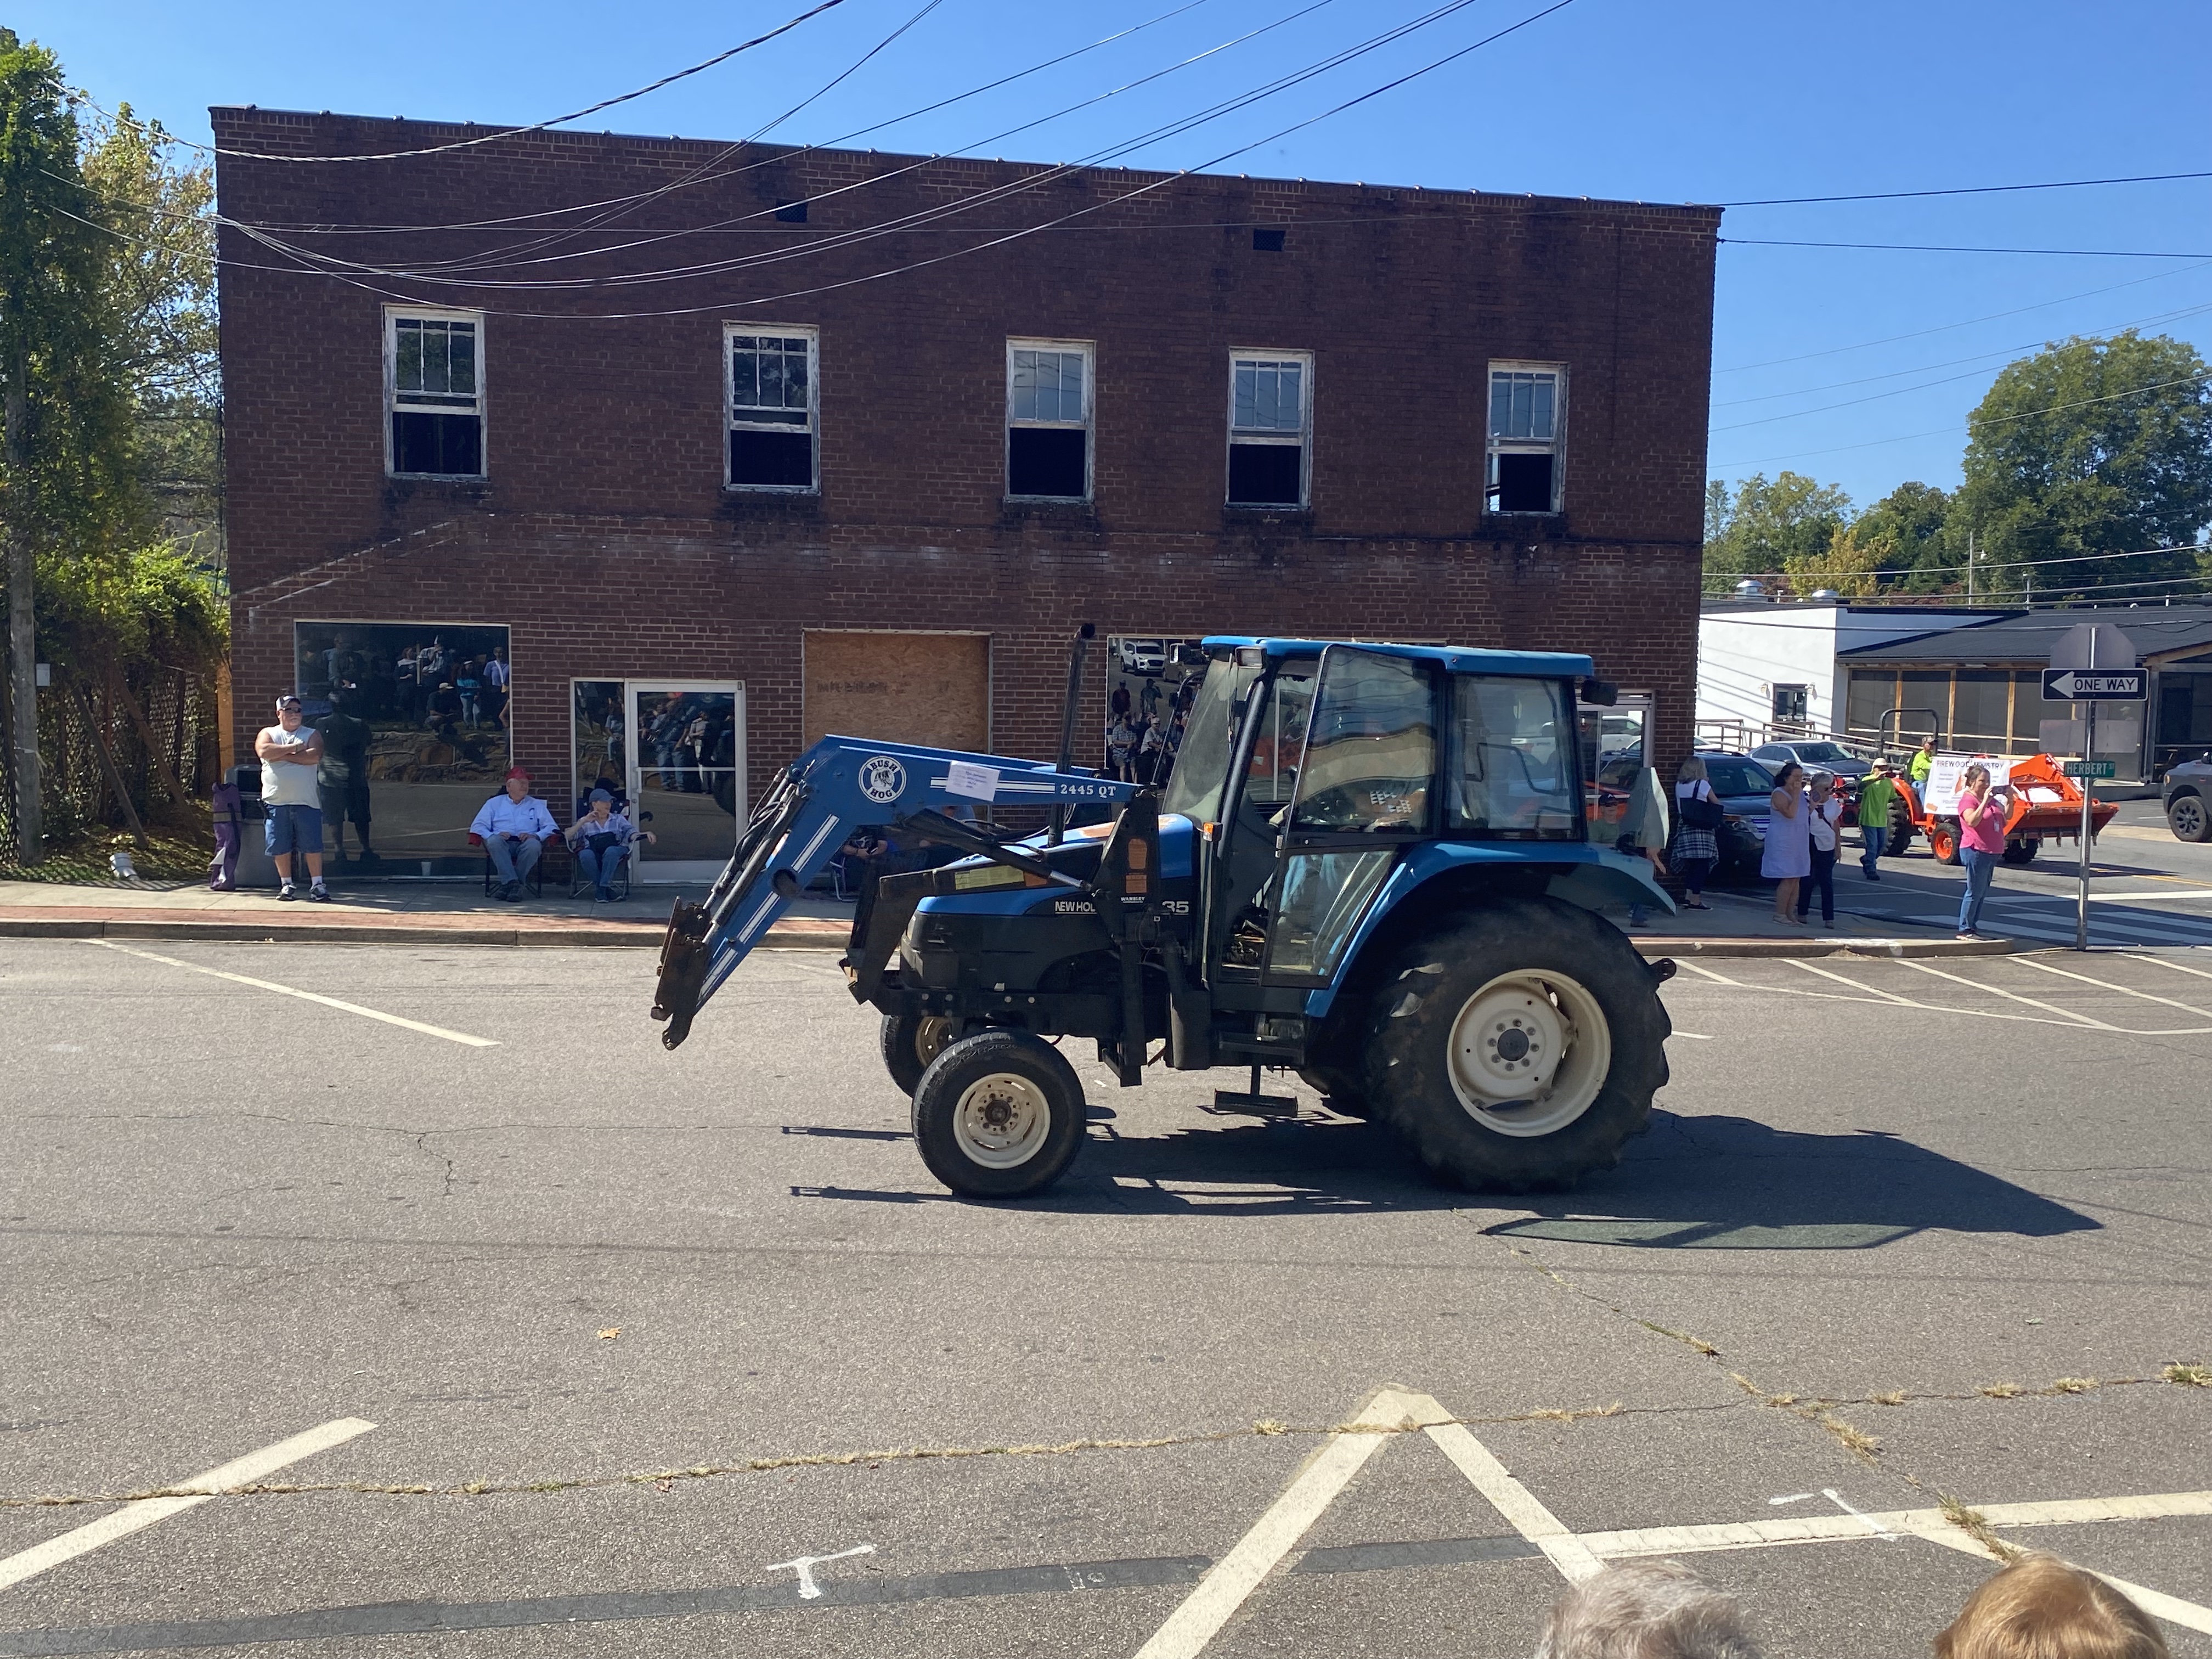 blue tractor in parade